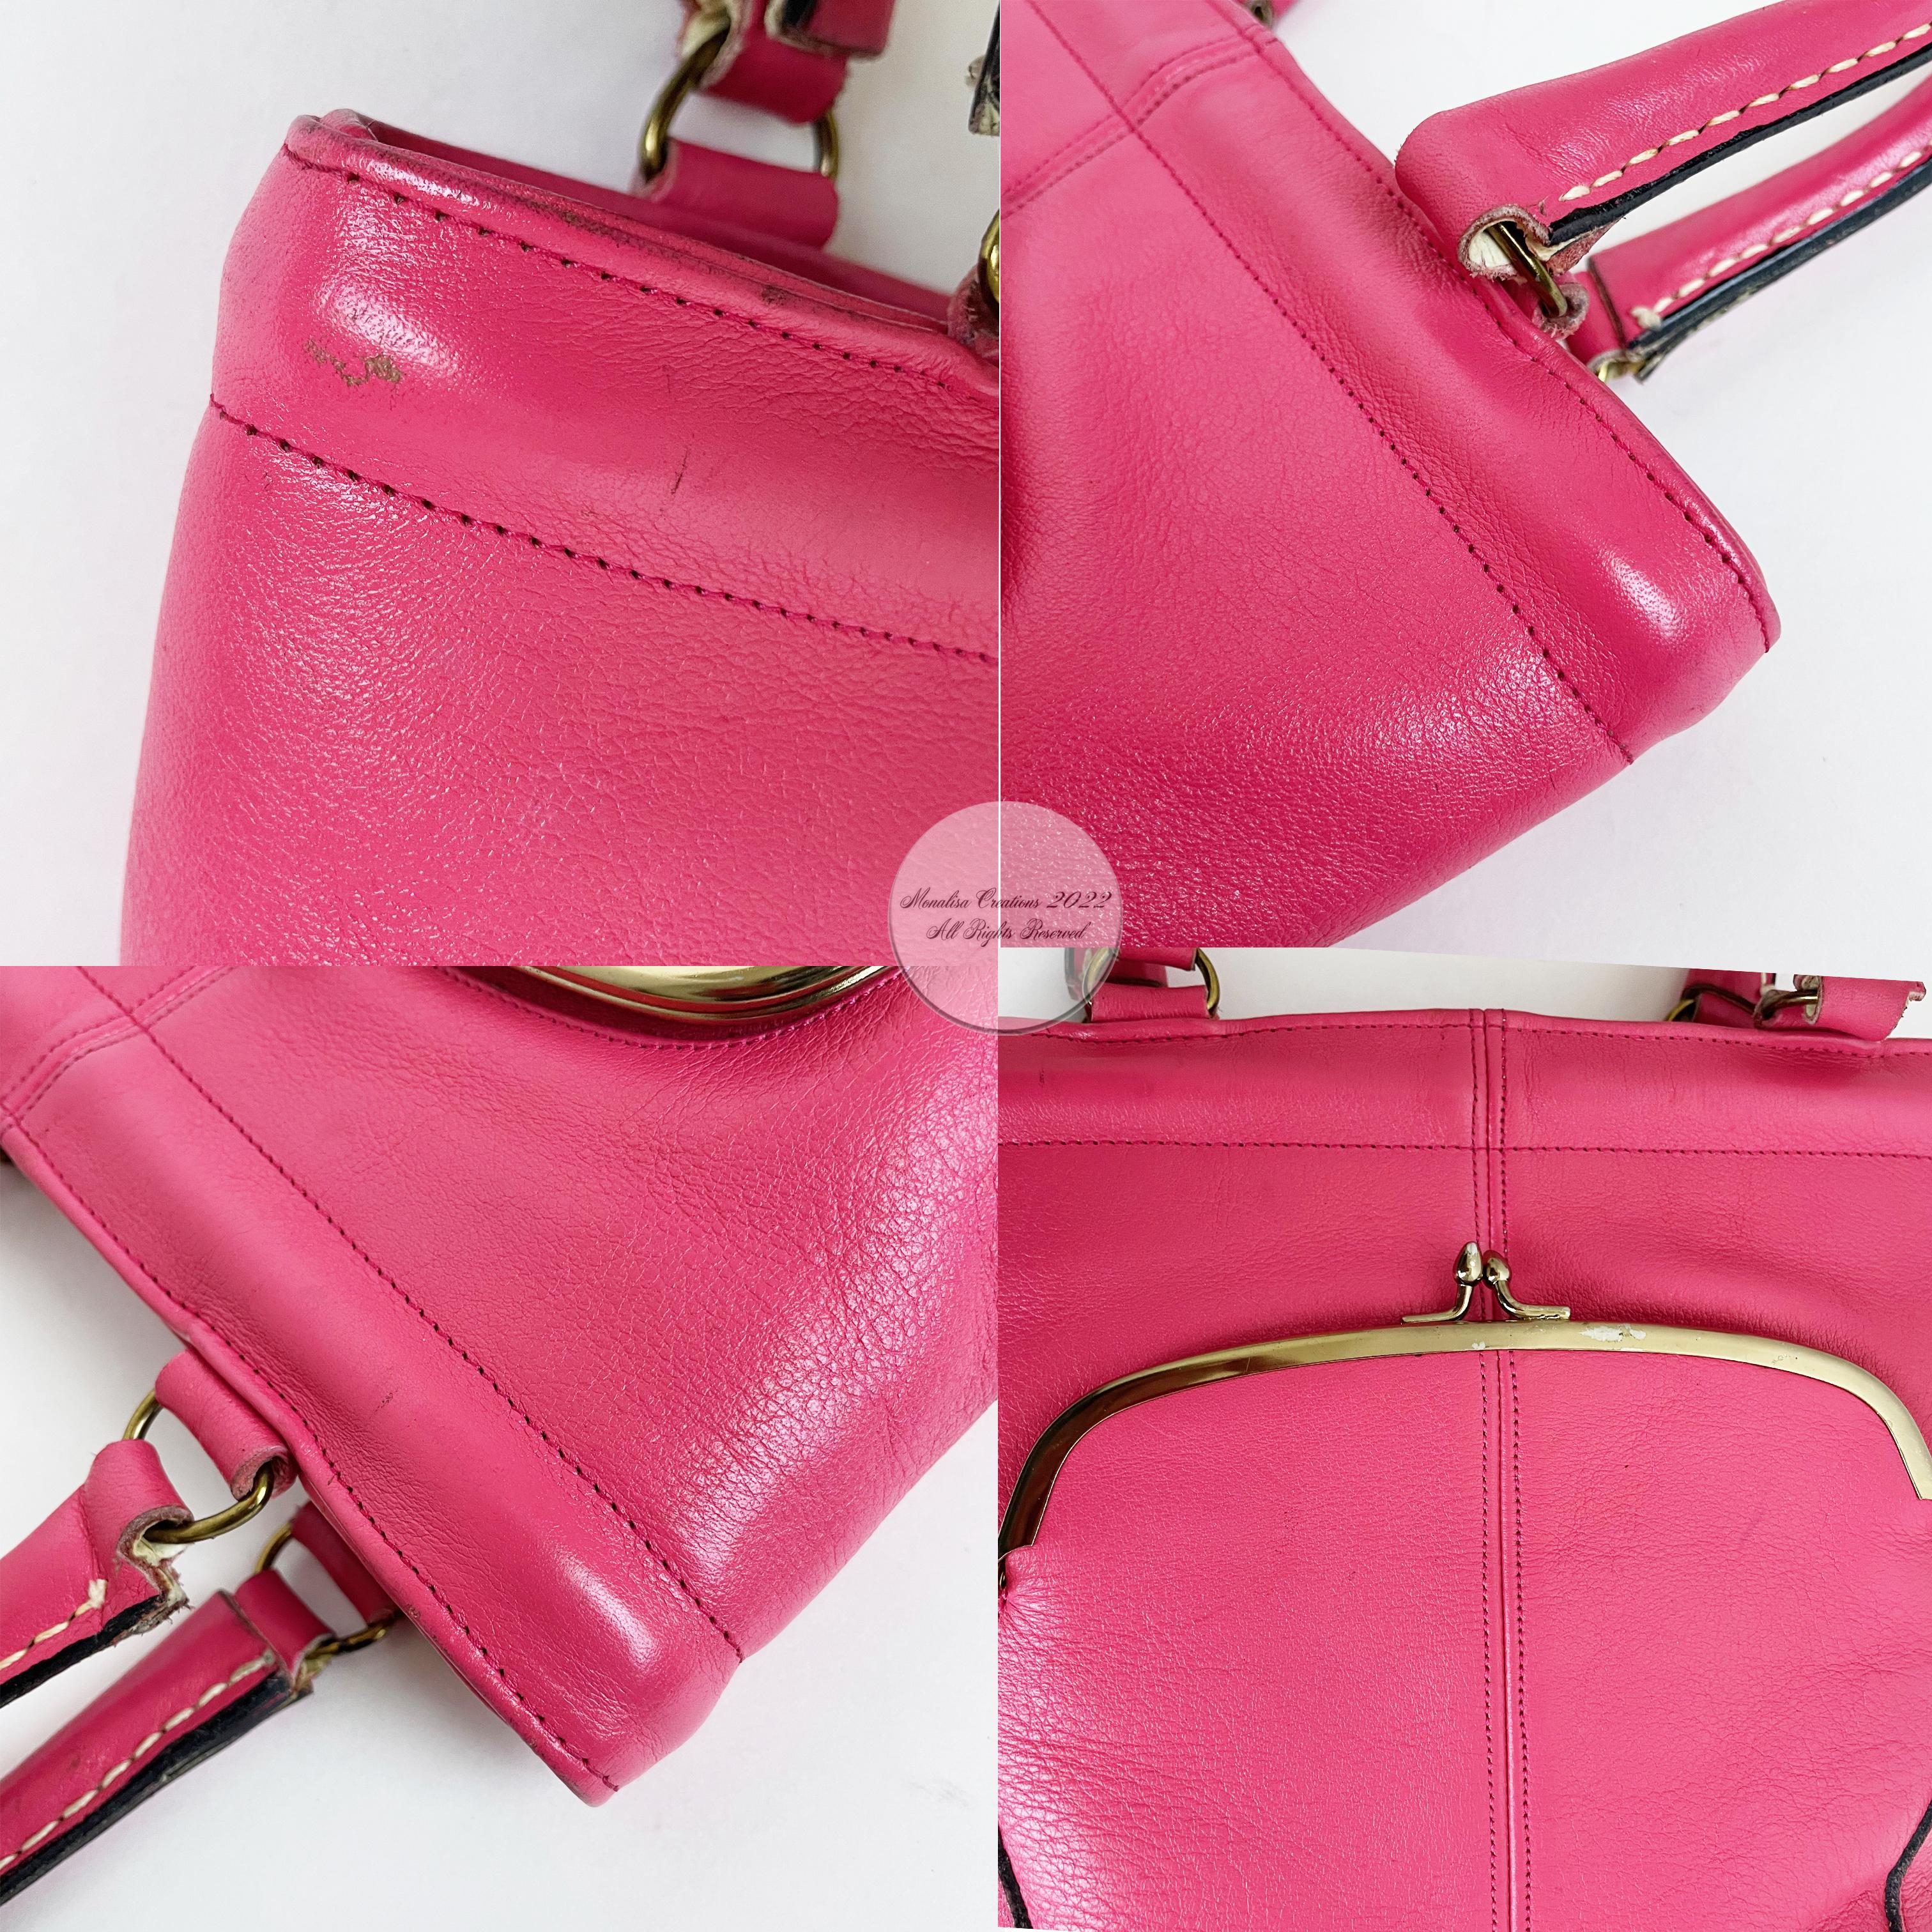 Bonnie Cashin for Coach Kiss Lock Tote Rare Pink Leather Vintage 60s 3